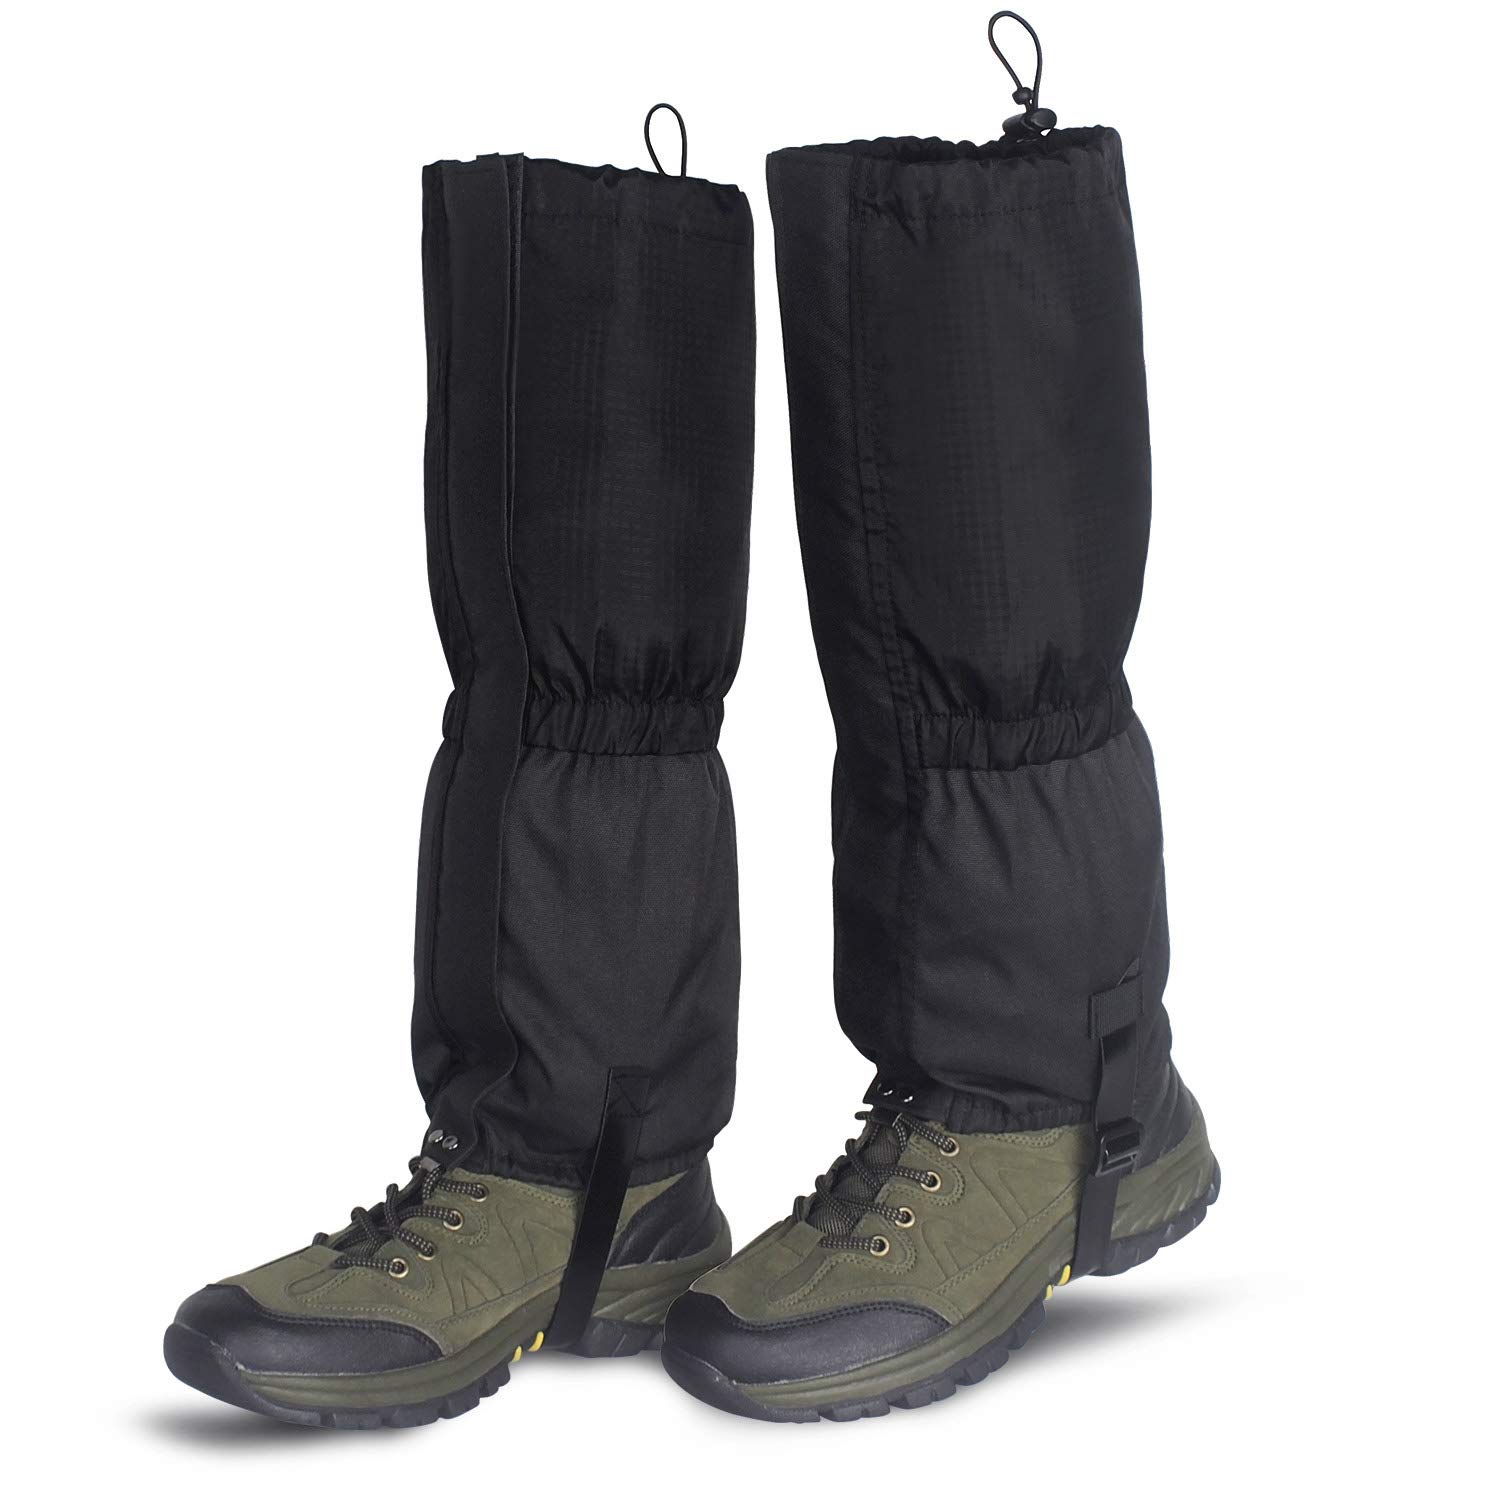 Top 10 Best Gaiters for Snowshoeing - Top Value Reviews